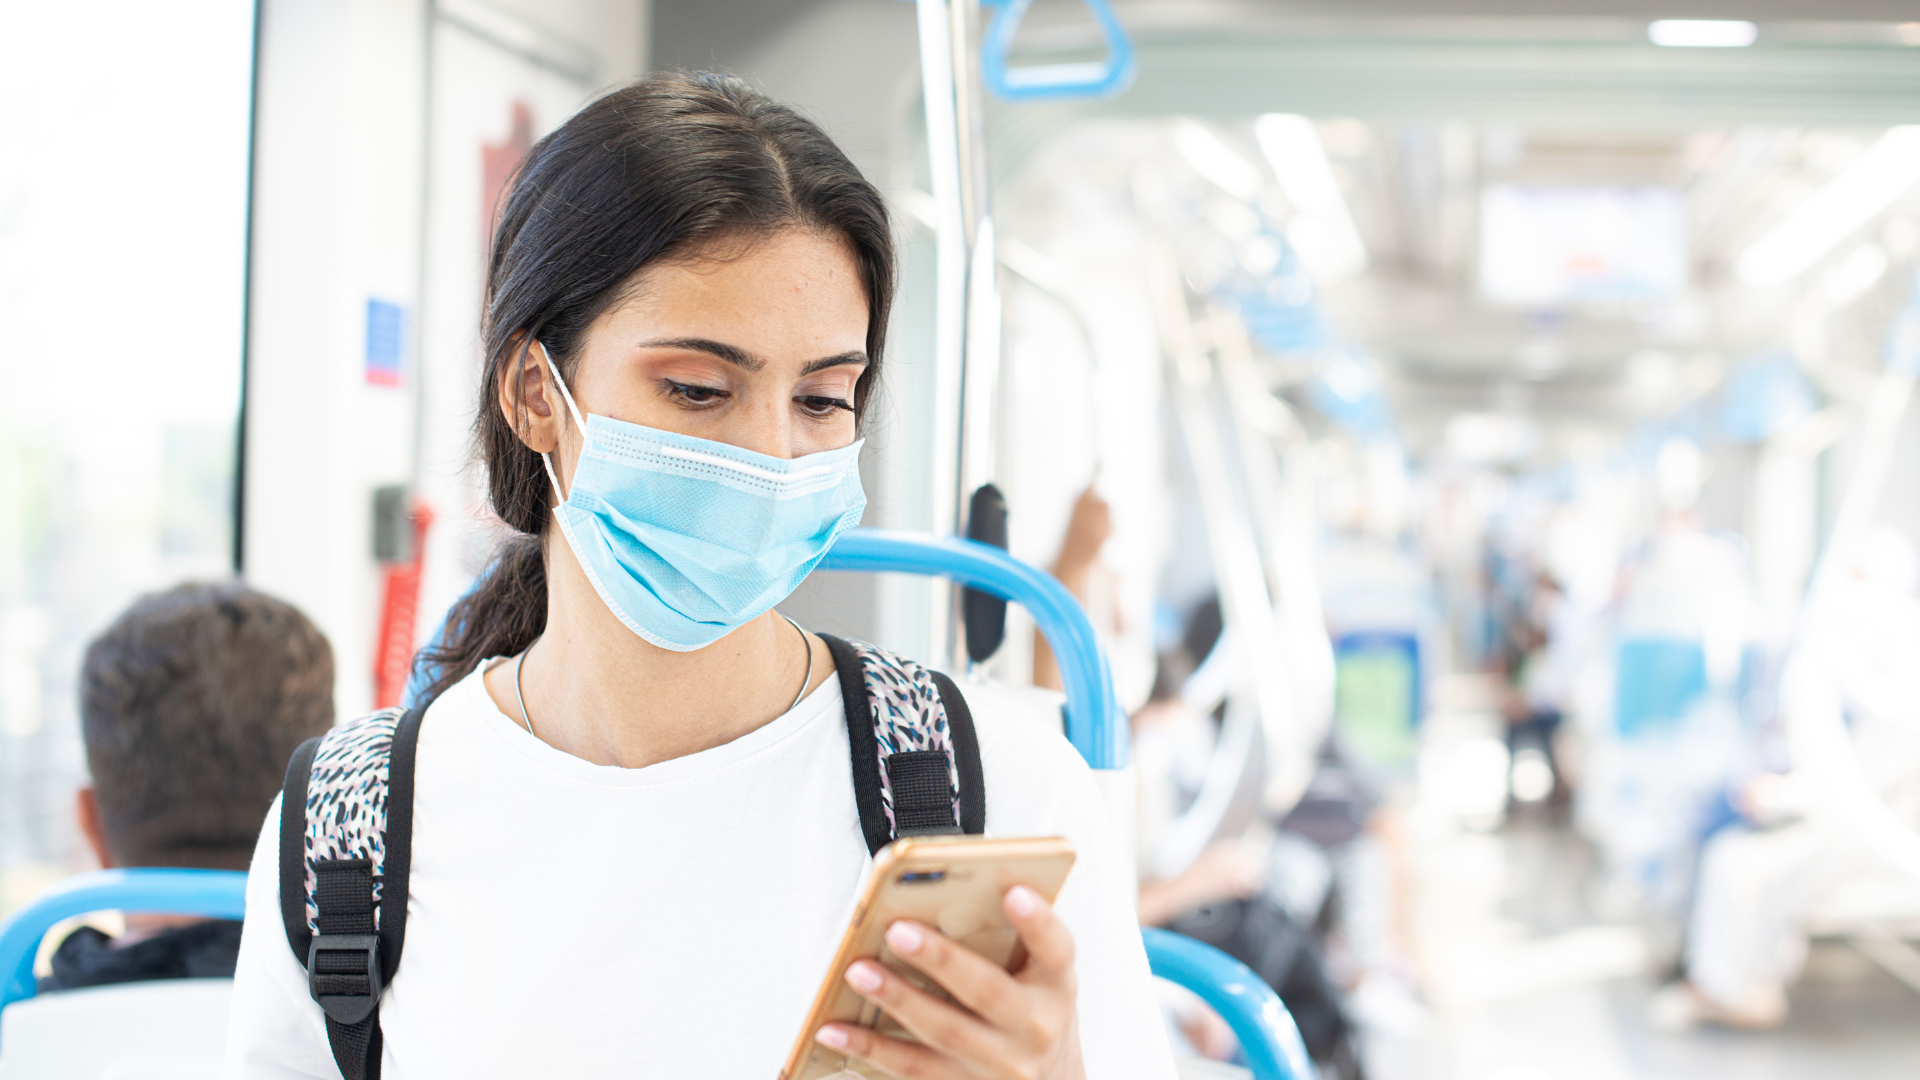 A young woman wearing a medical face mask is sitting in a public transit vehicle. She has dark hair tied back, is wearing a white shirt and a backpack, and is looking down at her smartphone. The background shows other passengers seated, with blue and white interior design elements.